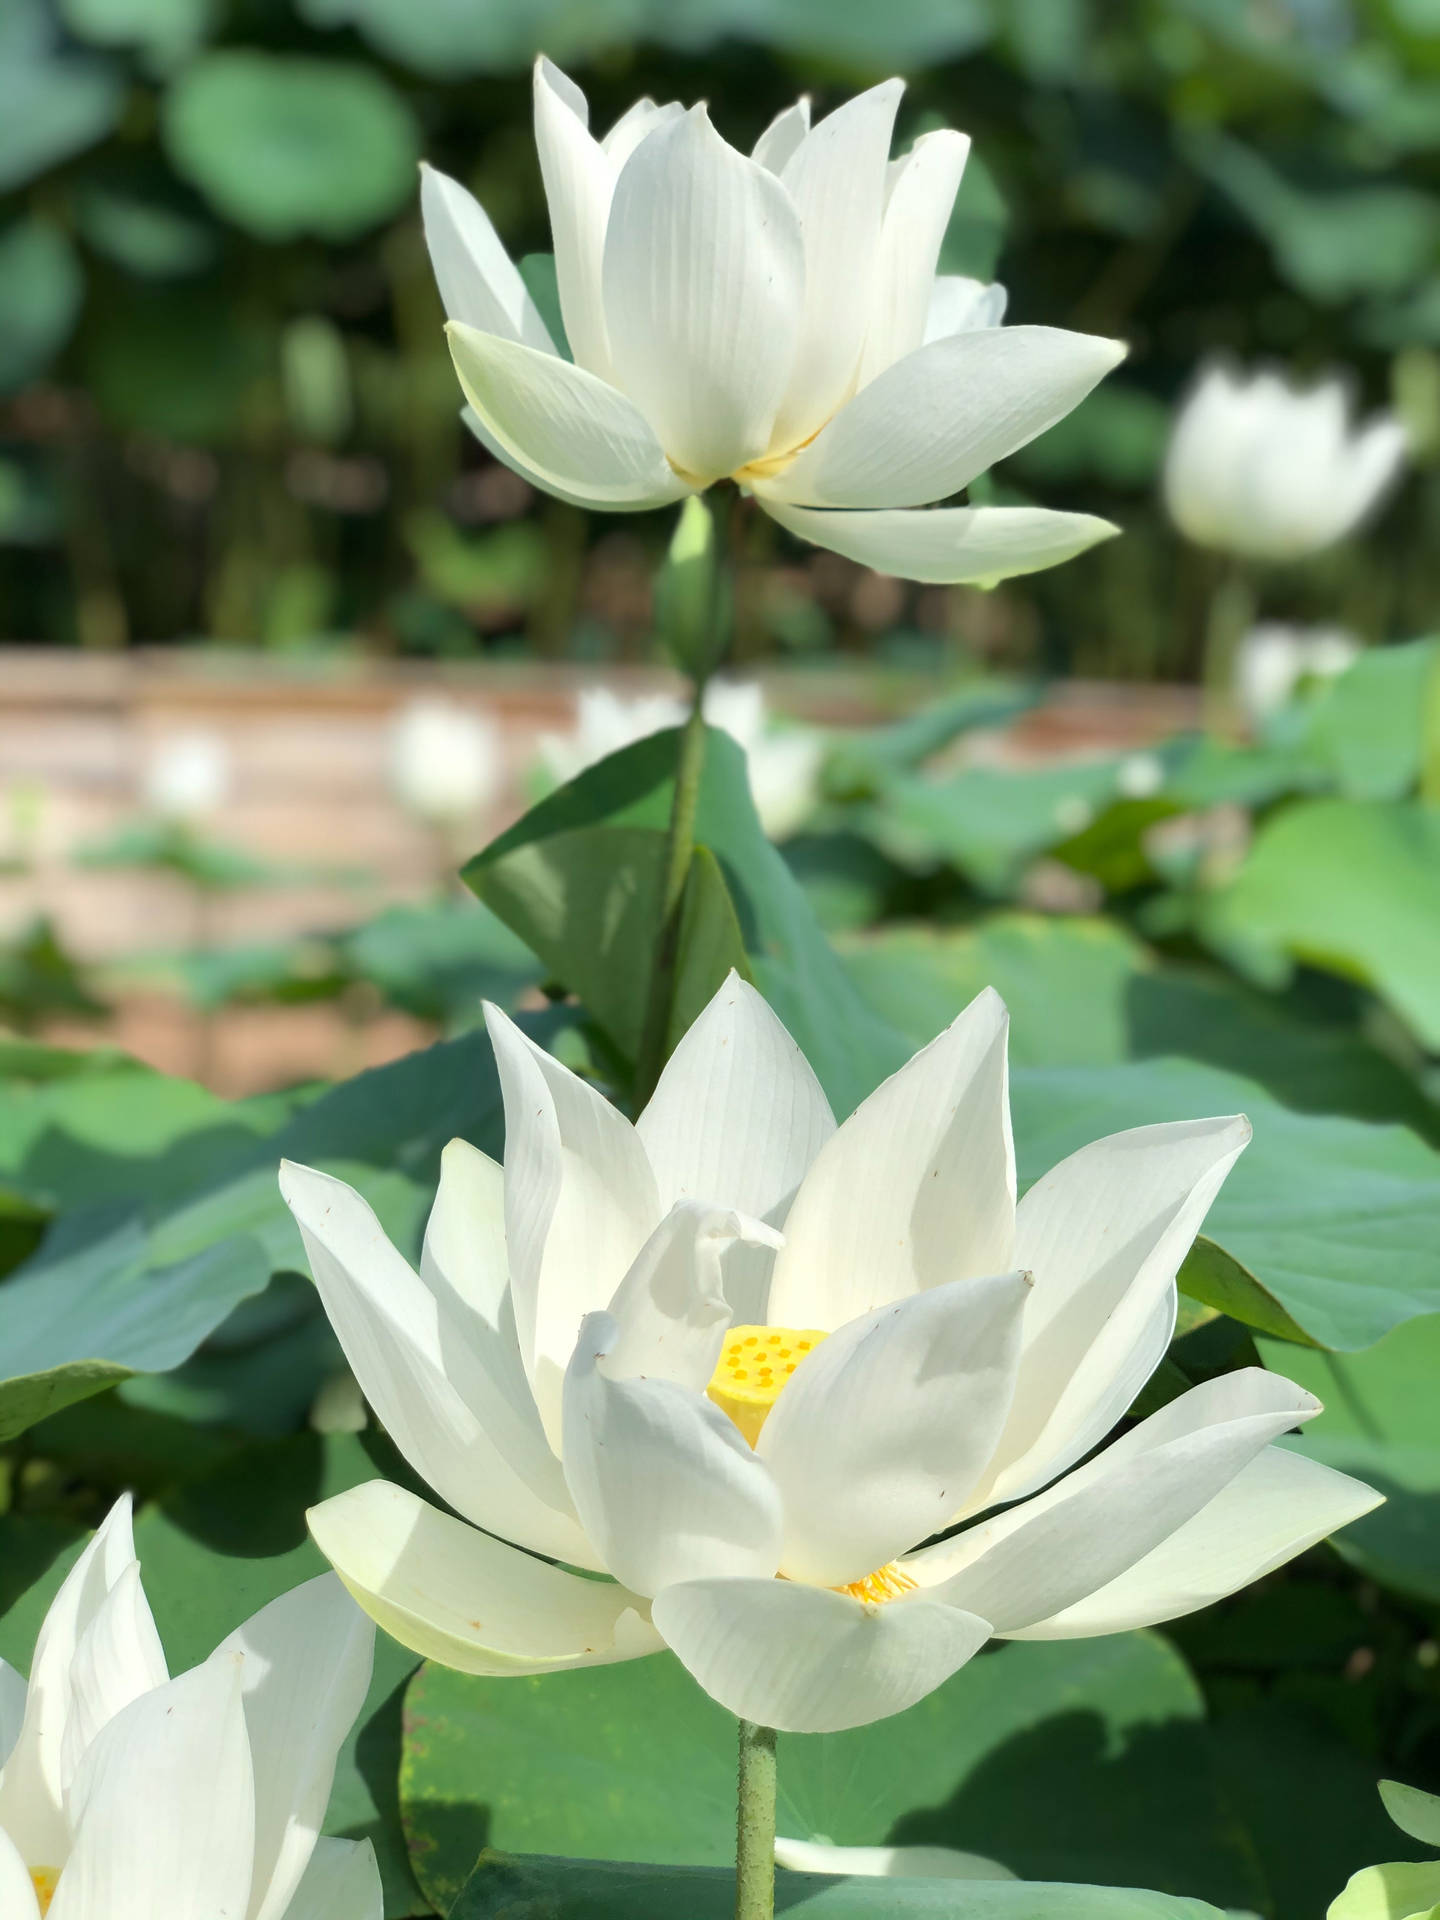 Lotus Flower 3024X4032 Wallpaper and Background Image